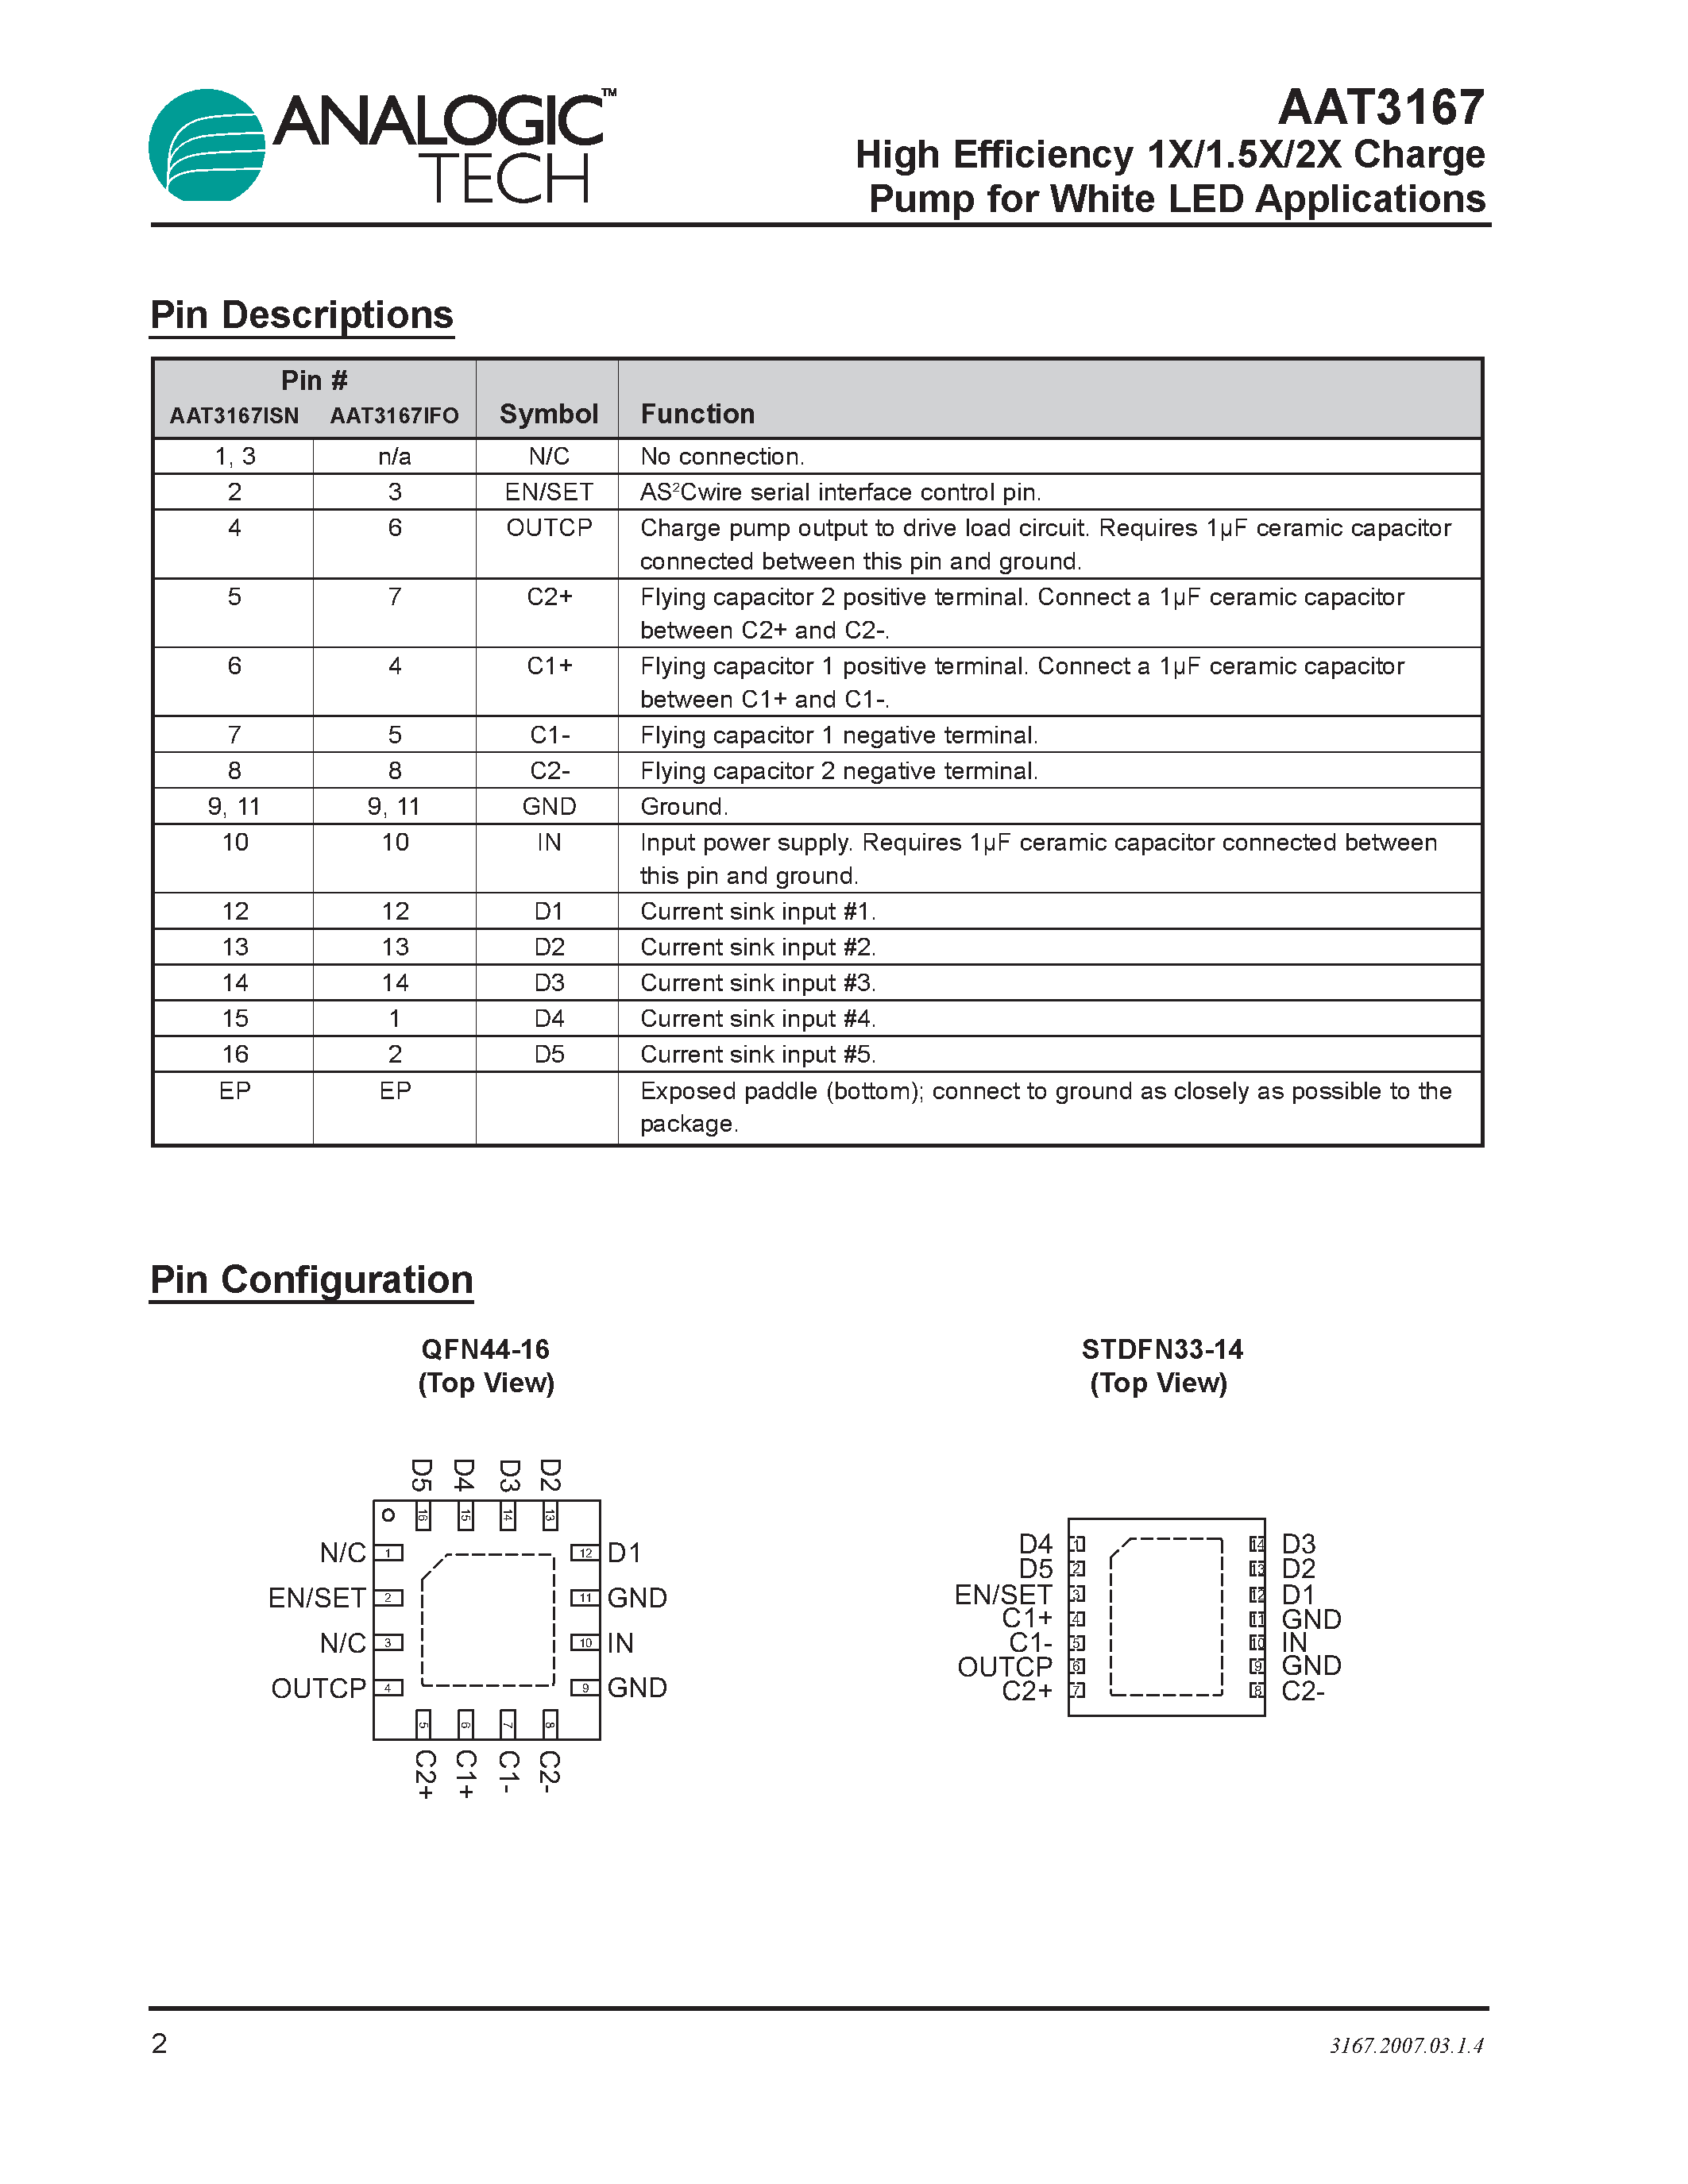 Datasheet AAT3167 - High Efficiency 1X/1.5X/2X Charge Pump page 2